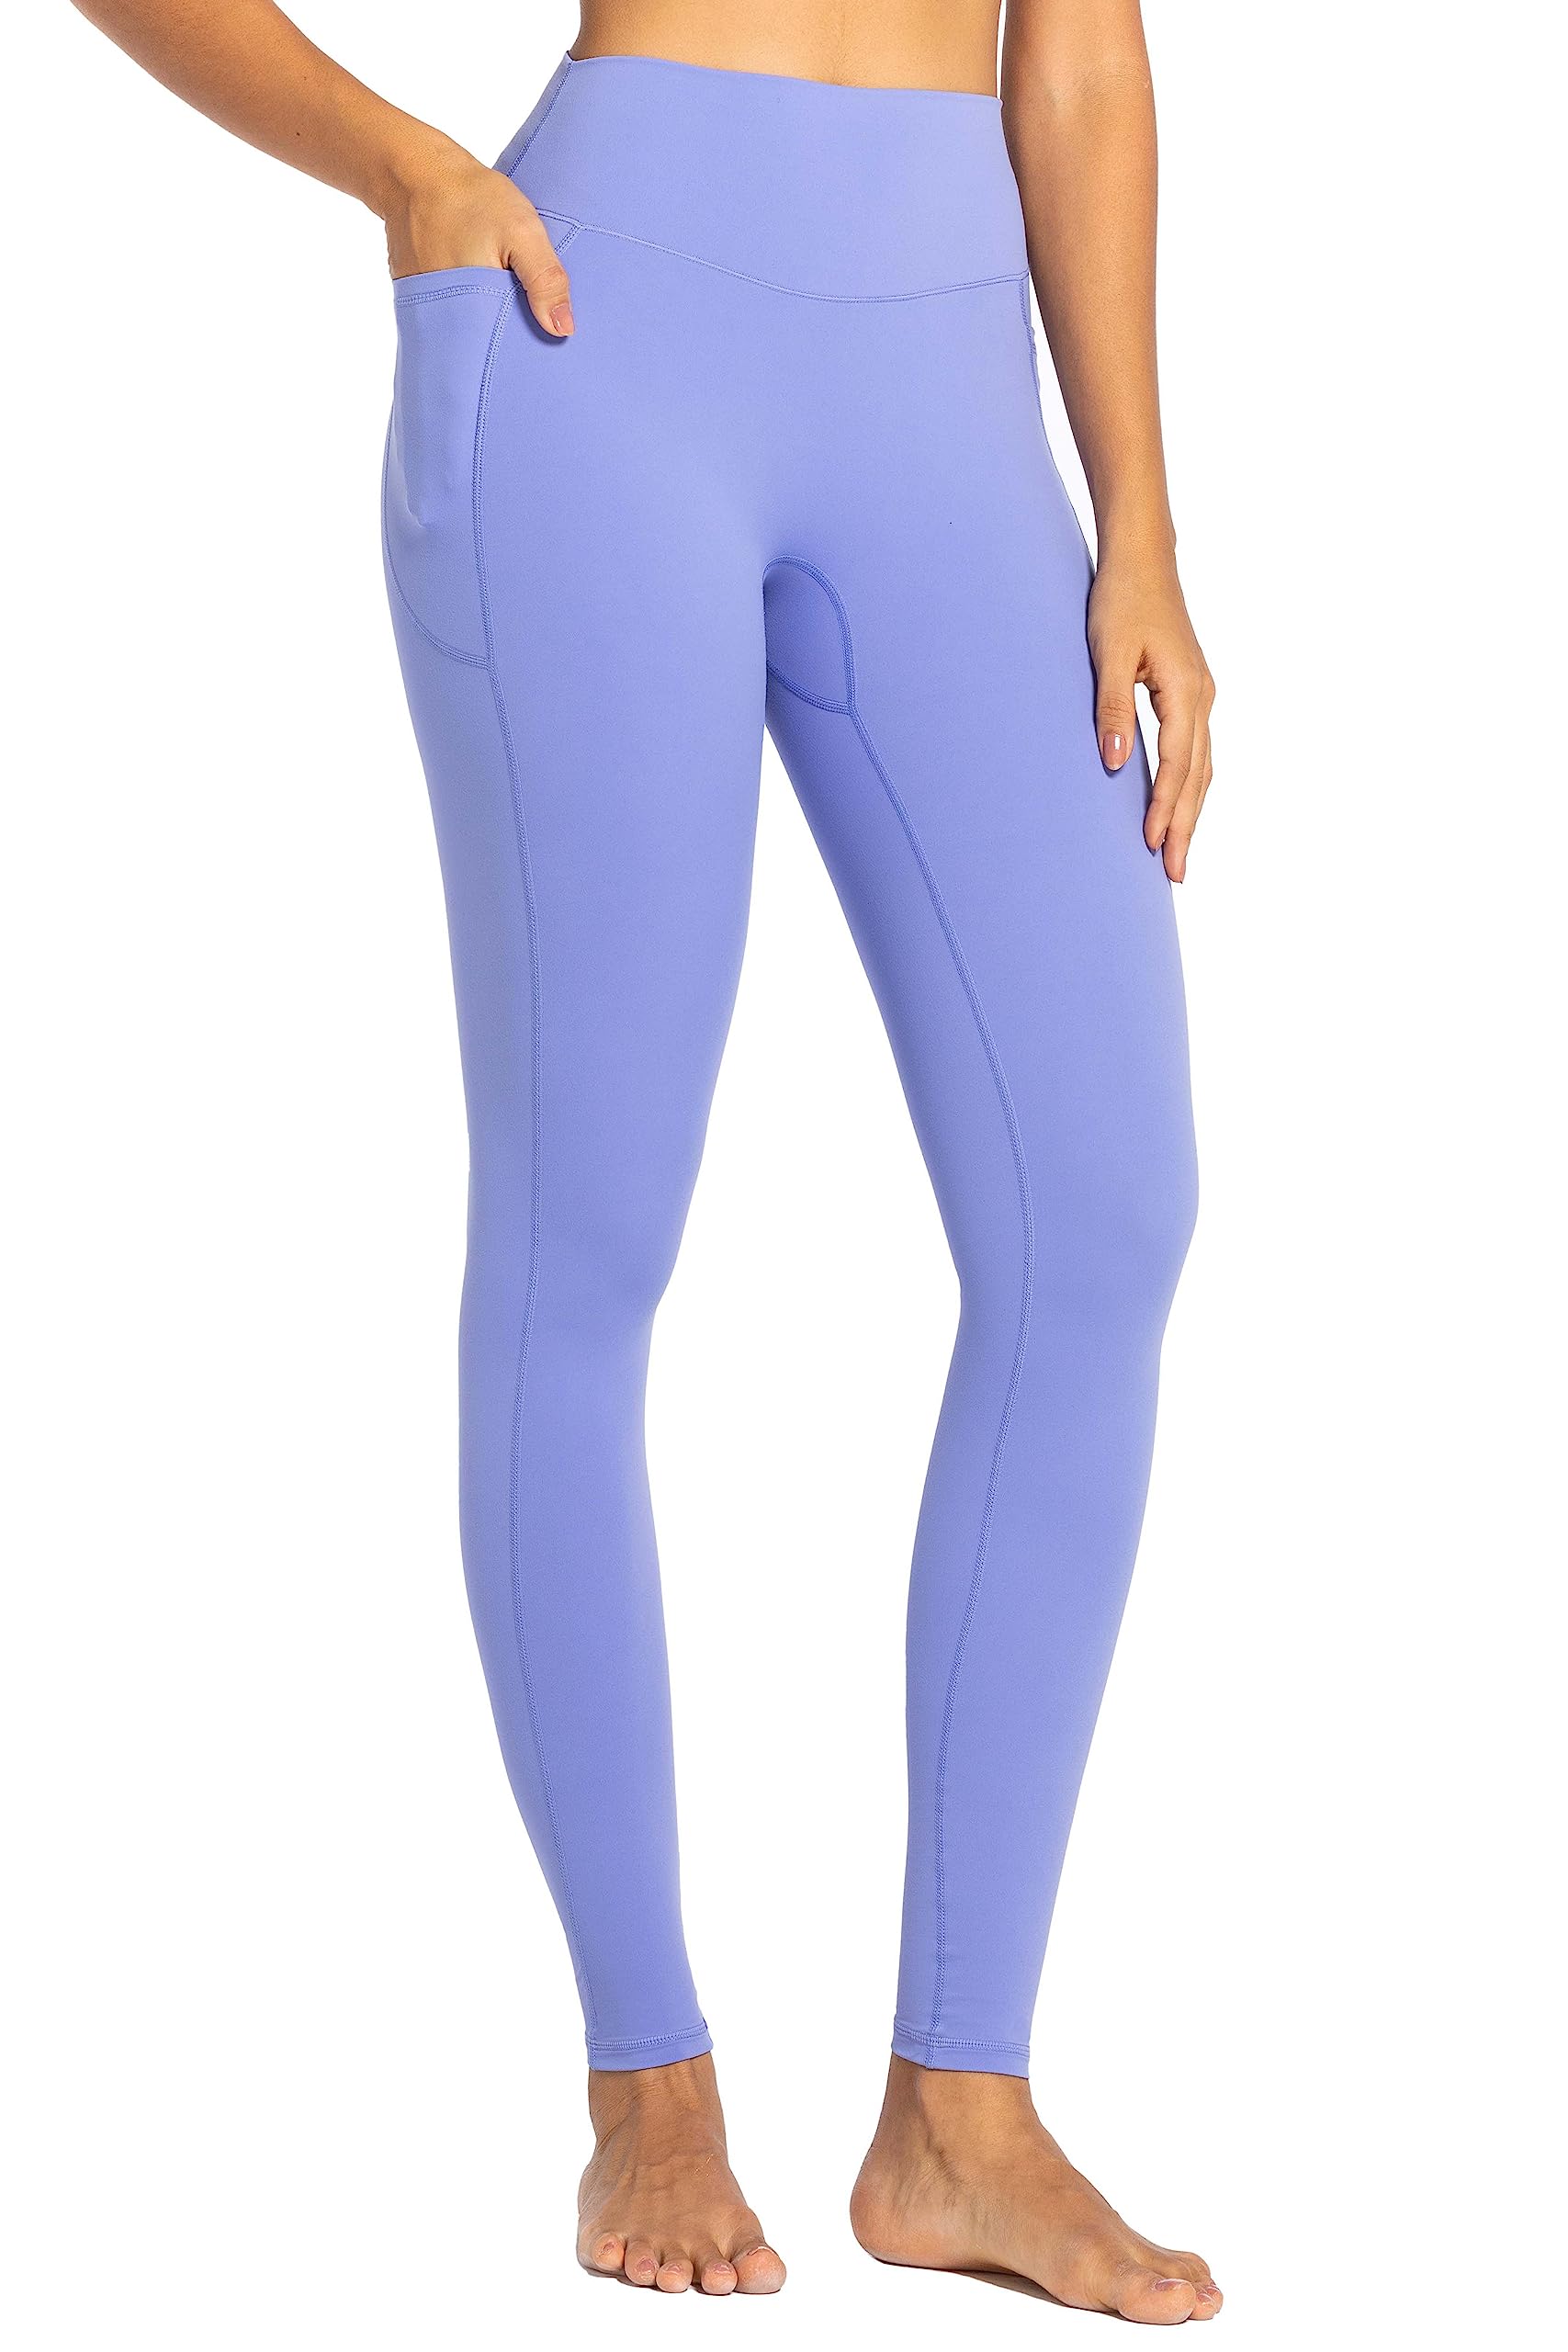 No Front Seam Workout Leggings for Women with Pockets – Sunzel